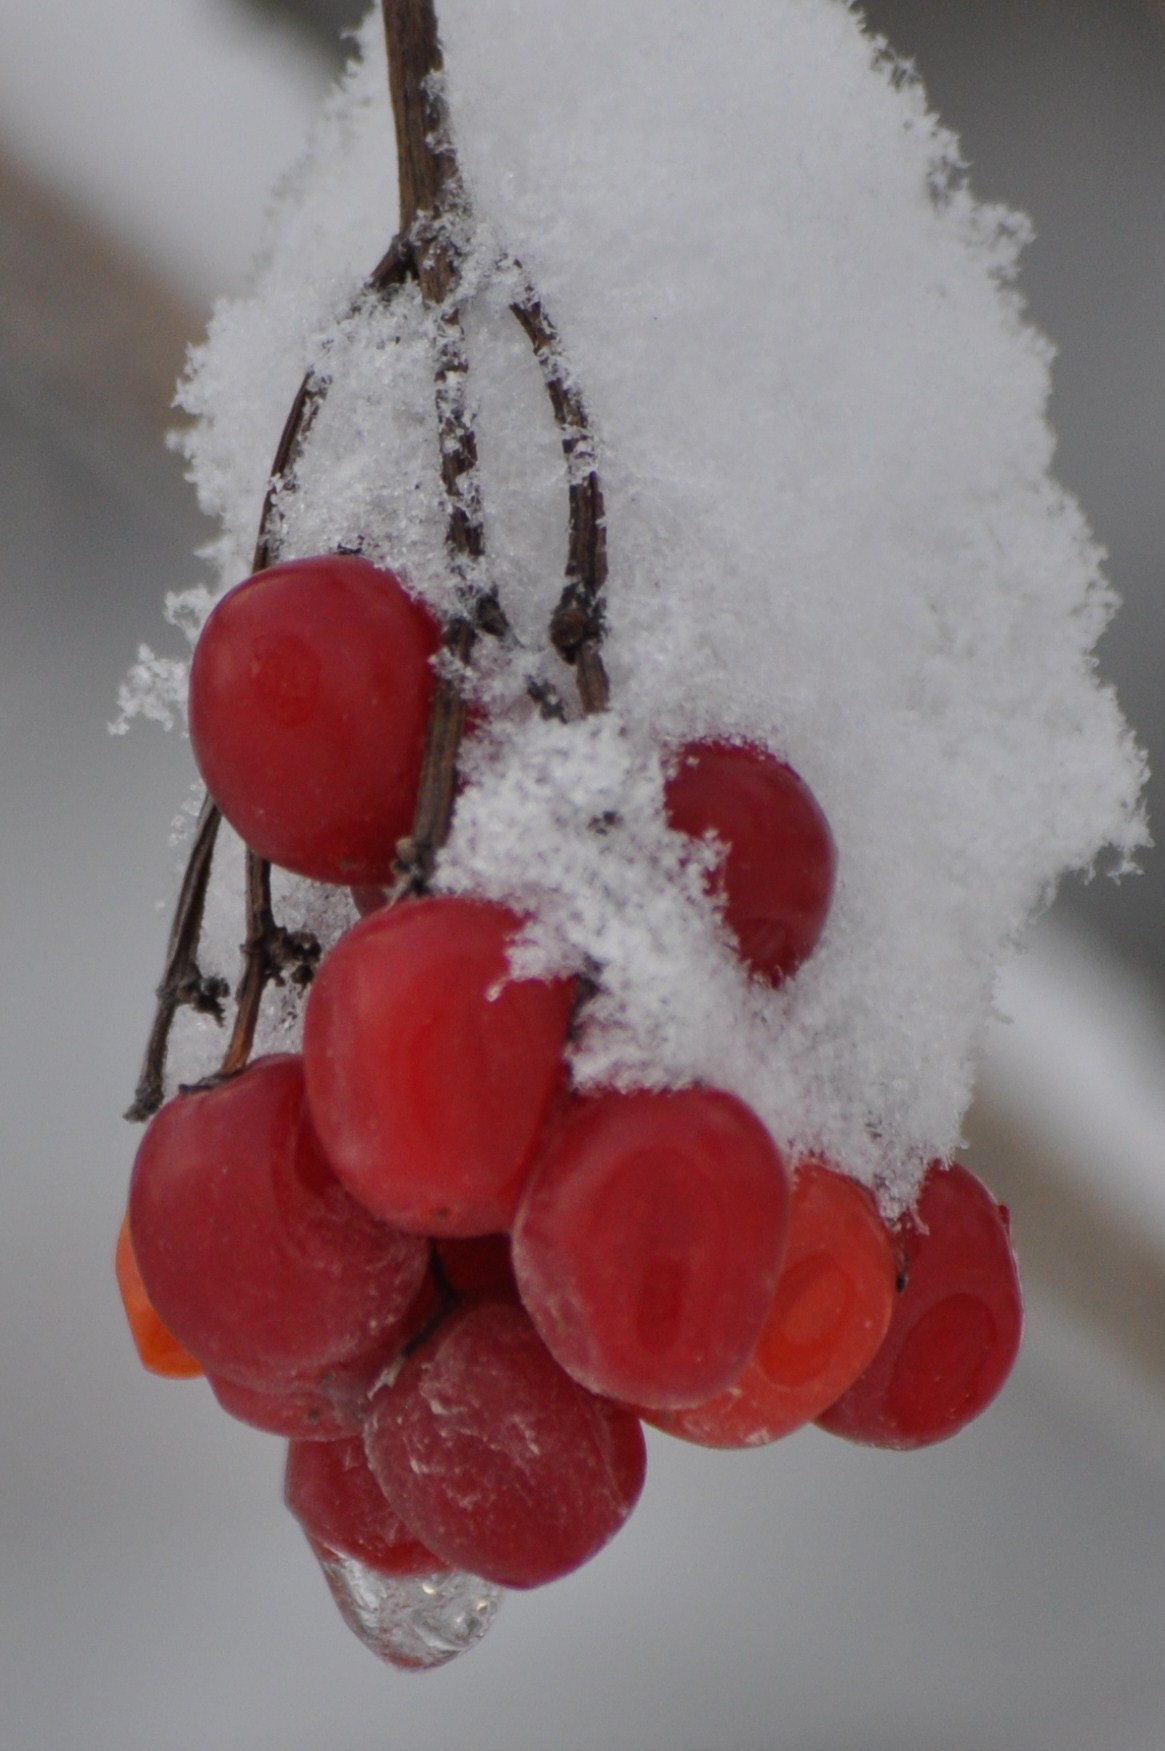 Frozen Berries In The Snow (user submitted)